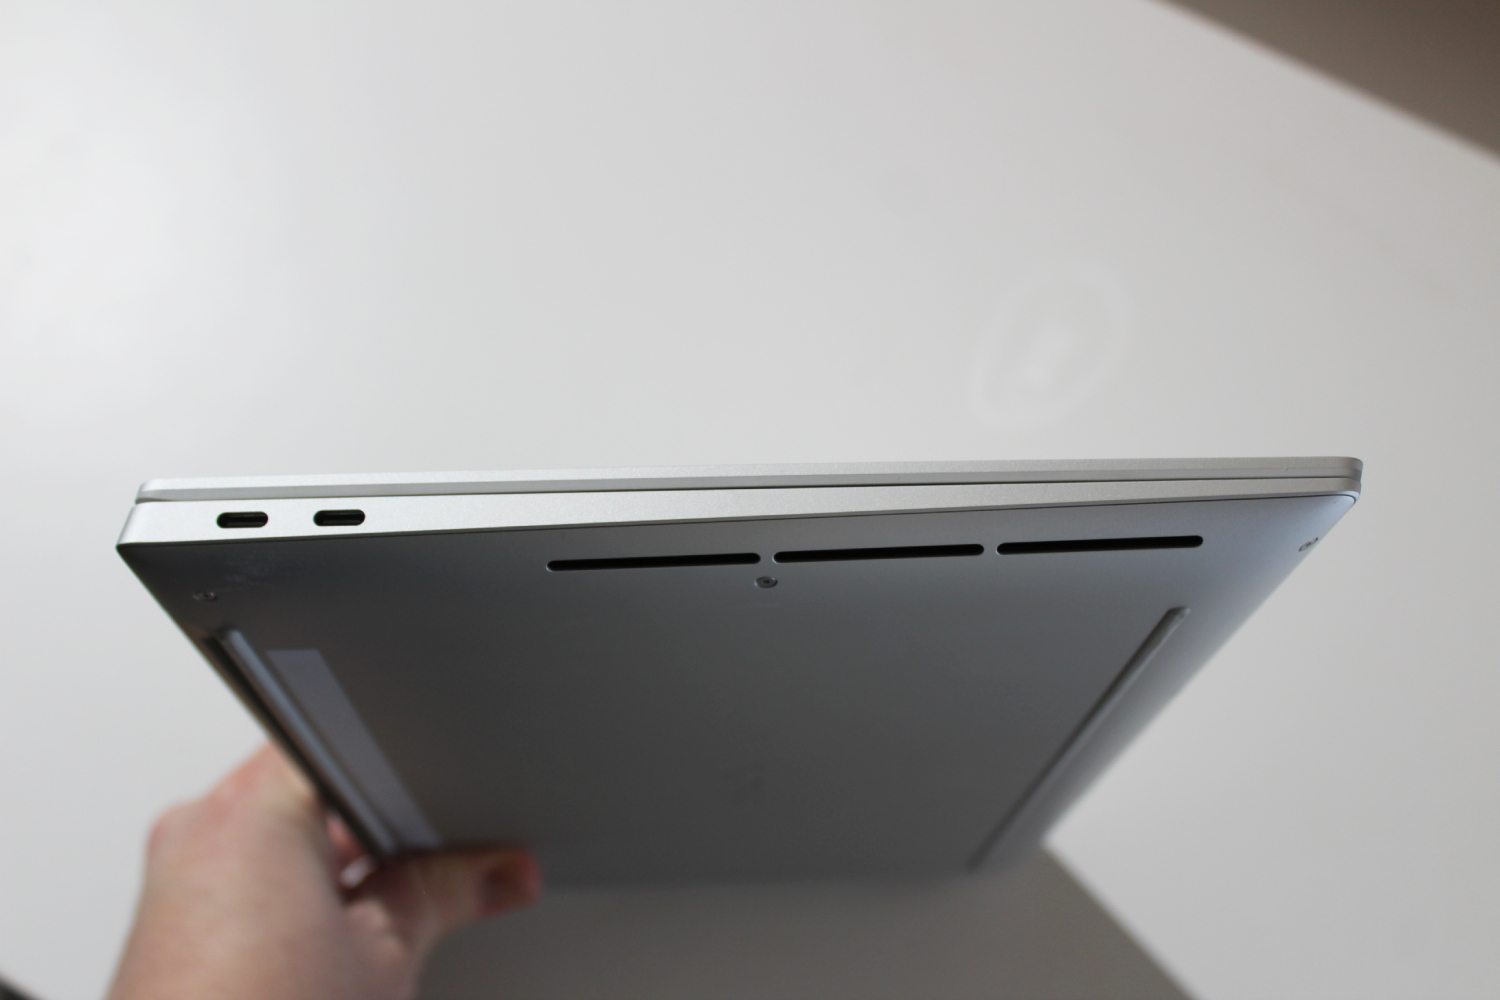 The side of the XPS 14, being held up by a hand.